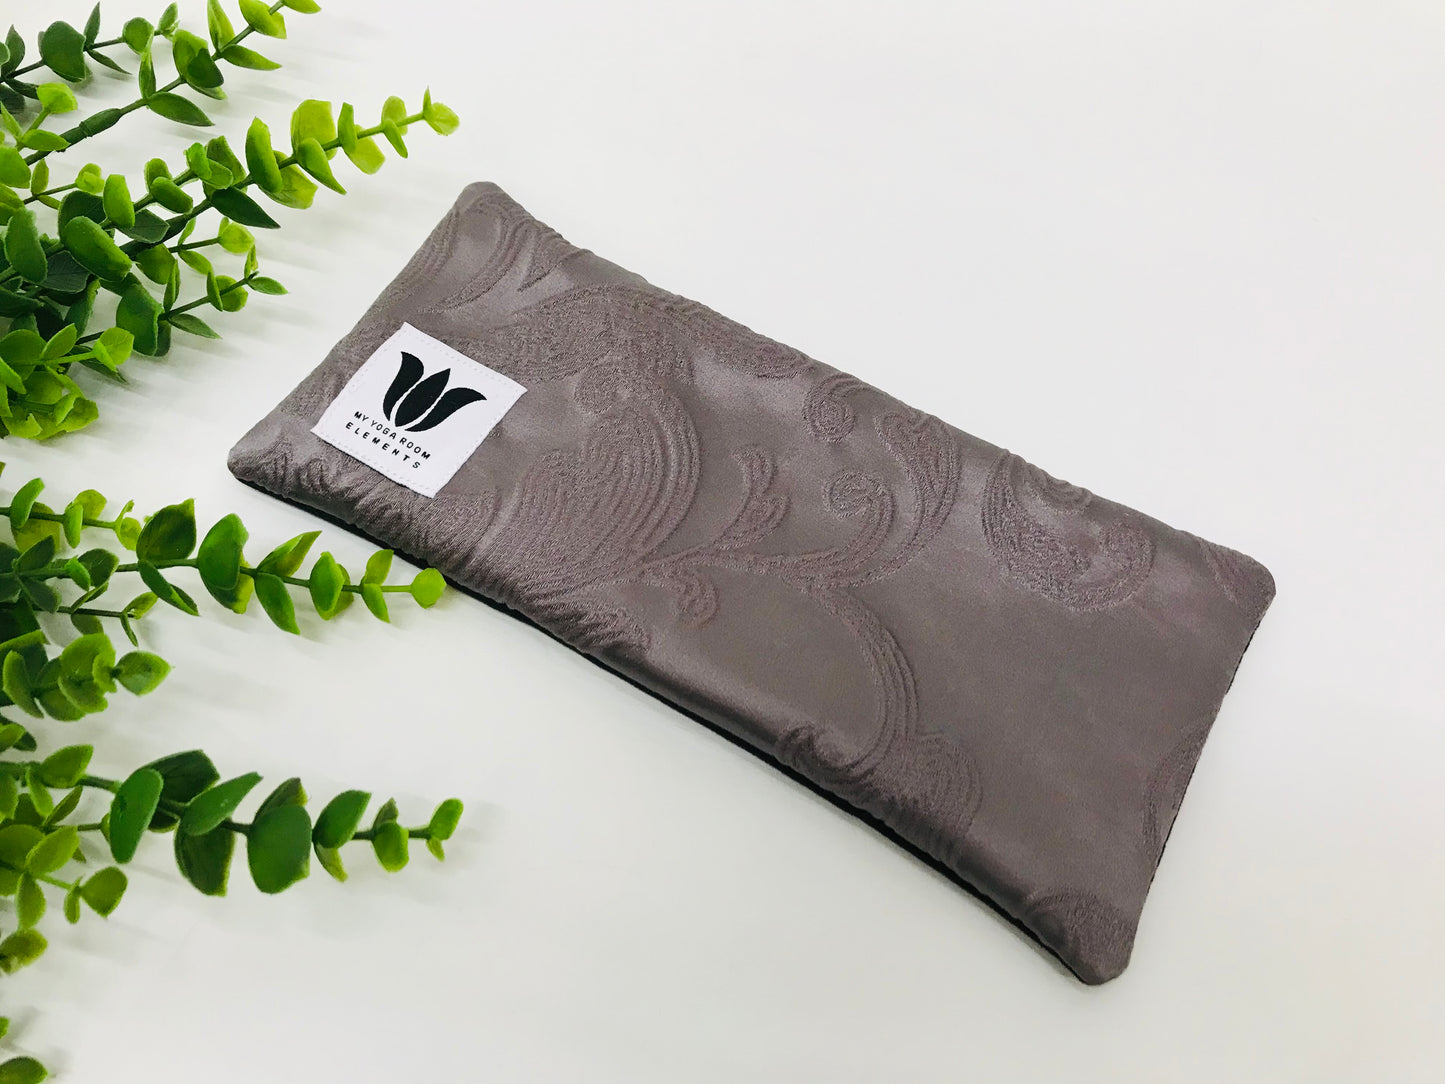 Yoga eye pillow, unscented, therapeutically weighted to soothe eye strain and stress or enhance your savasana. Handcrafted in Canada by My Yoga Room Elements. Purple embossed satin print and bamboo fabric.